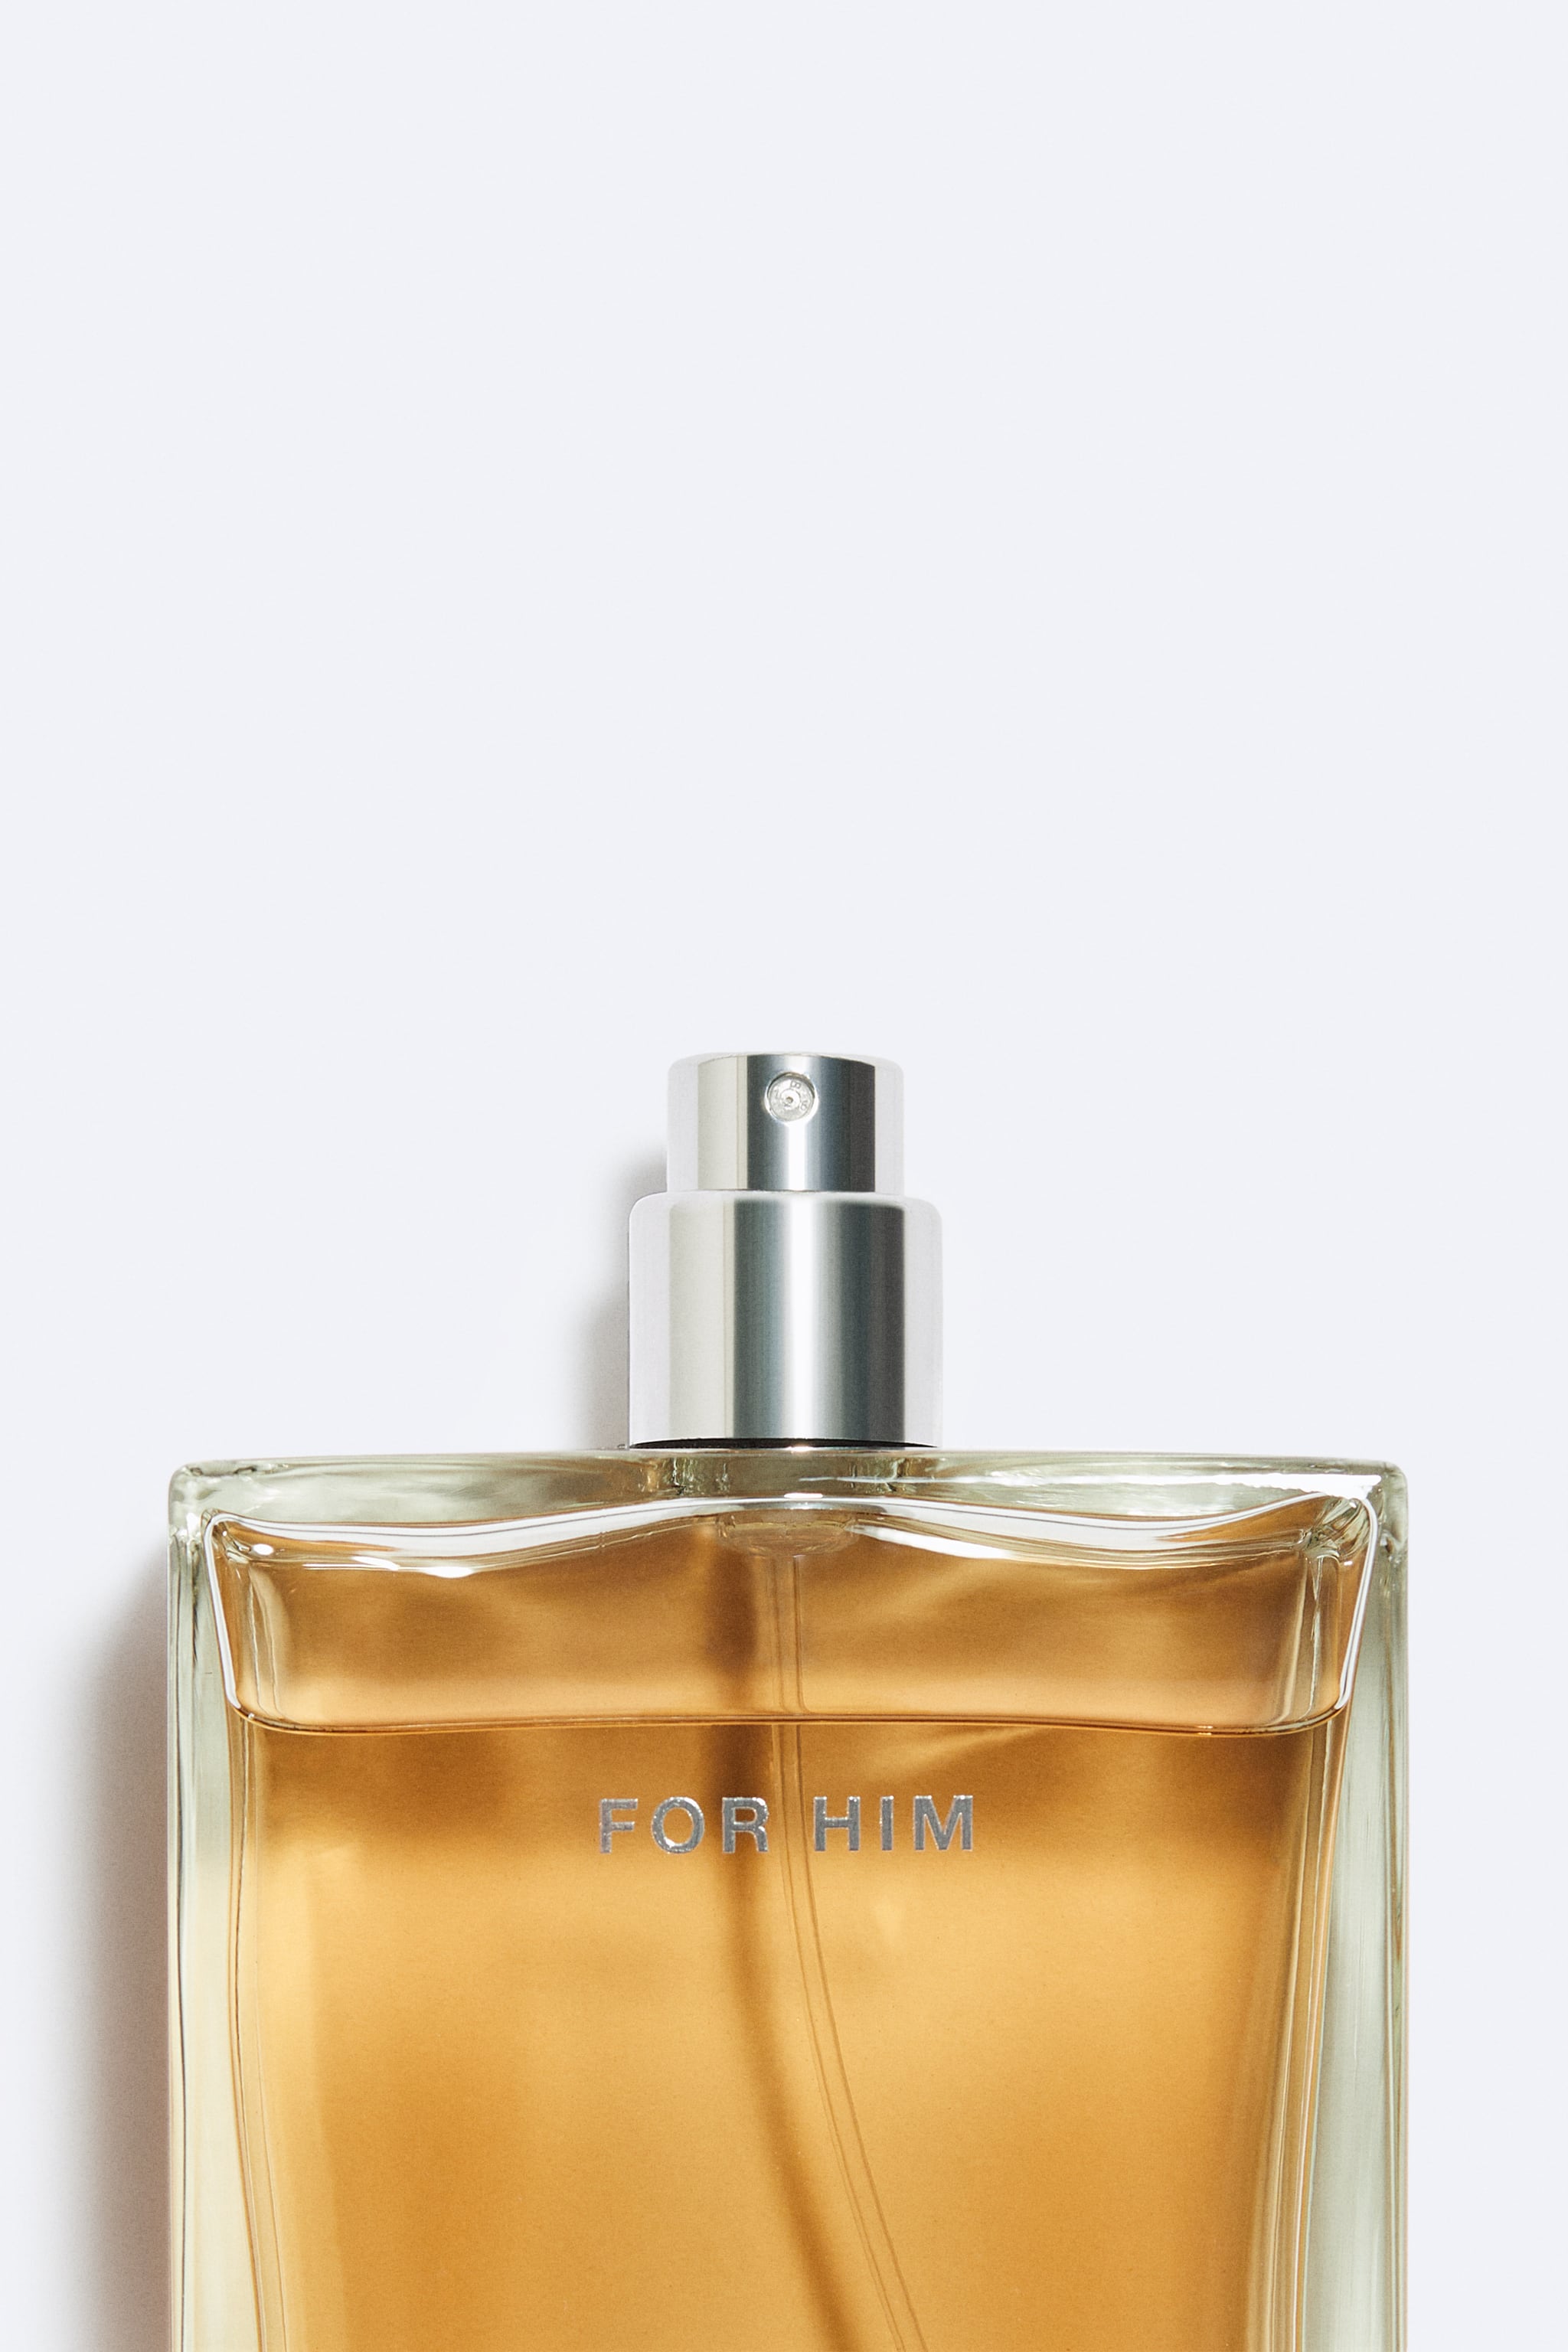 FOR HIM EDT 100 ML